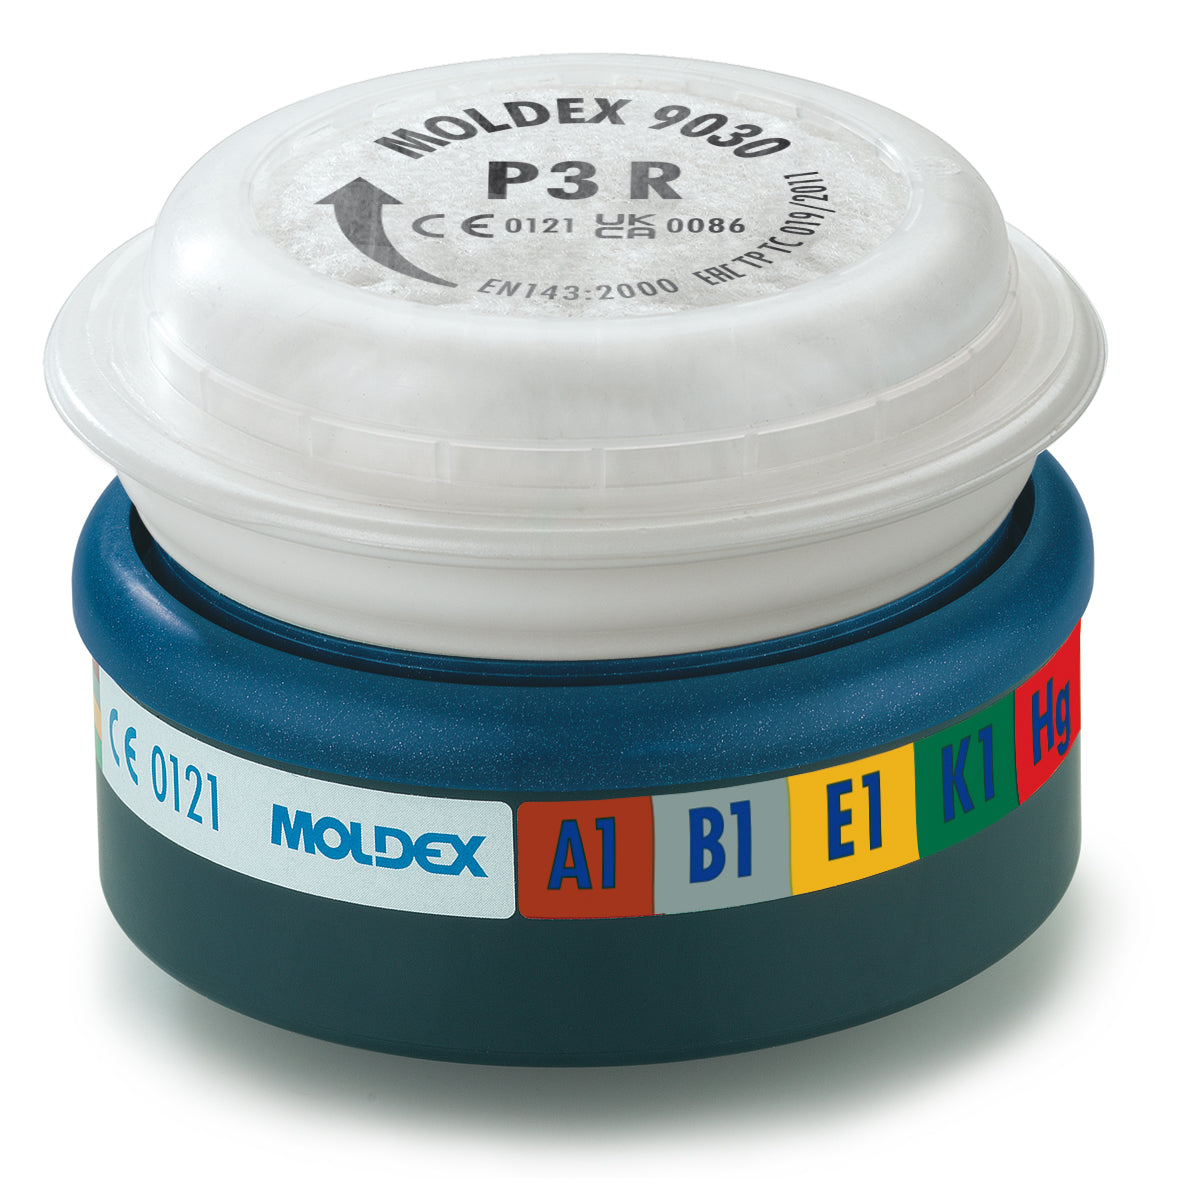 Moldex ABEK1 Hg P3 RD for the 7000 / 9000 Series (Box of 6) - DaltonSafety